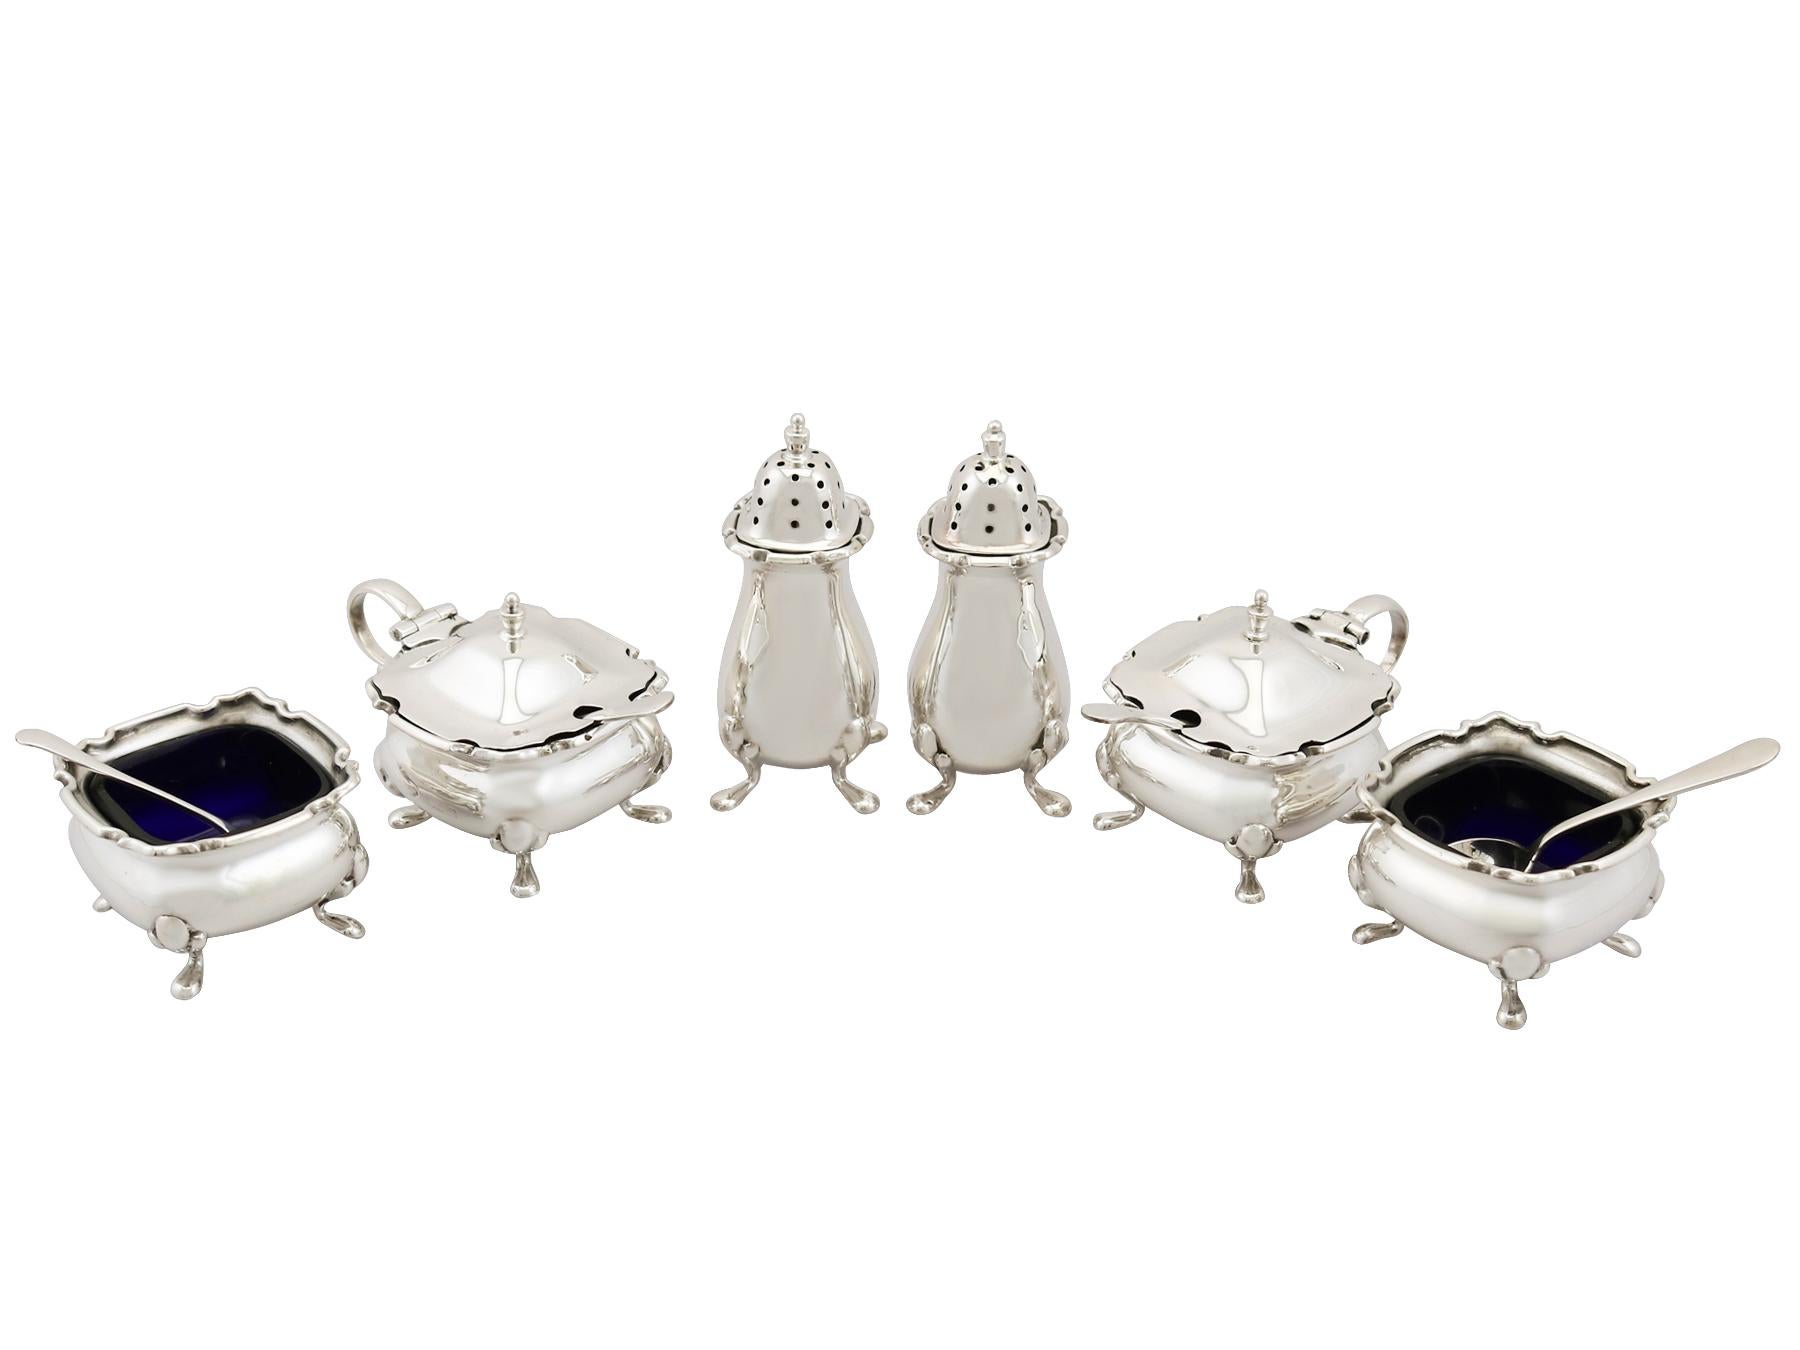 An exceptional, fine and impressive antique George V English sterling silver six piece condiment/cruet set - boxed; an addition to our dining silverware collection.

This exceptional antique George V six-piece sterling silver condiment set